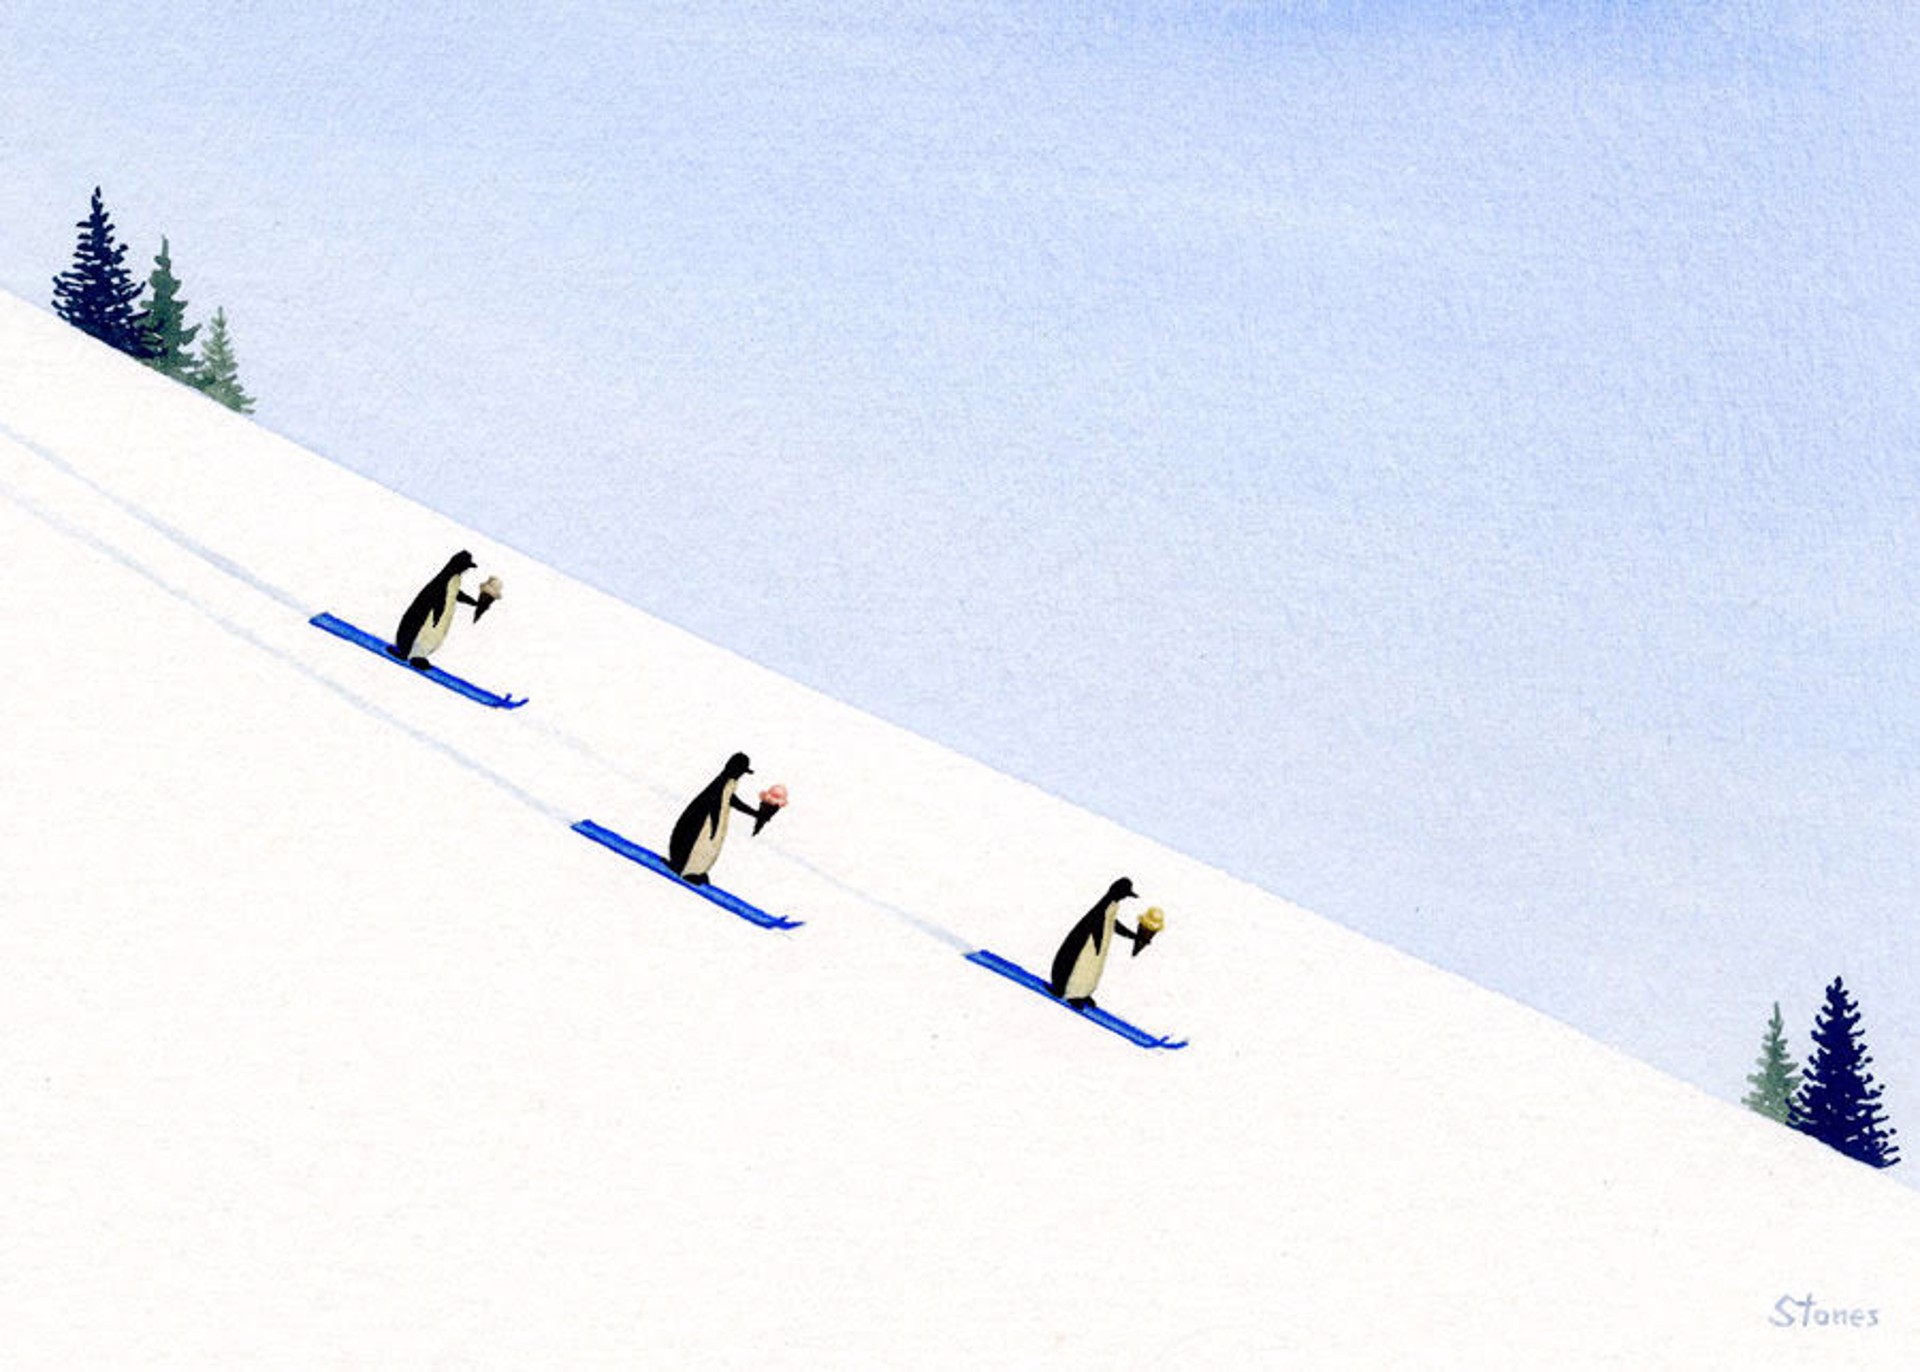 Skis and Ice Cream by Greg Stones